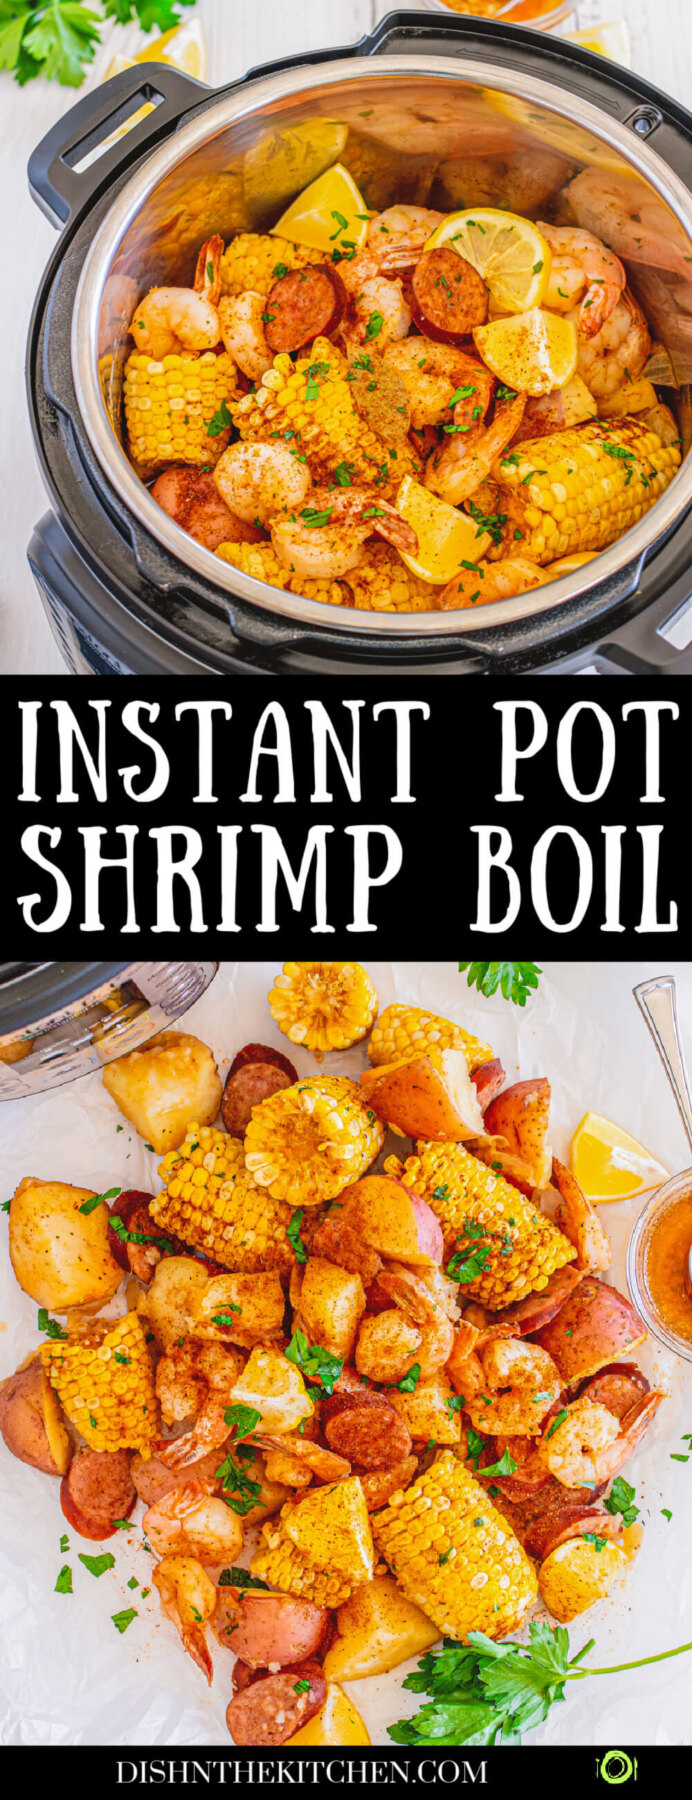 Pinterest image of spice coated shrimp, potatoes, and corn with lemon wedges in an Instant Pot and spread out on a white parchment paper.